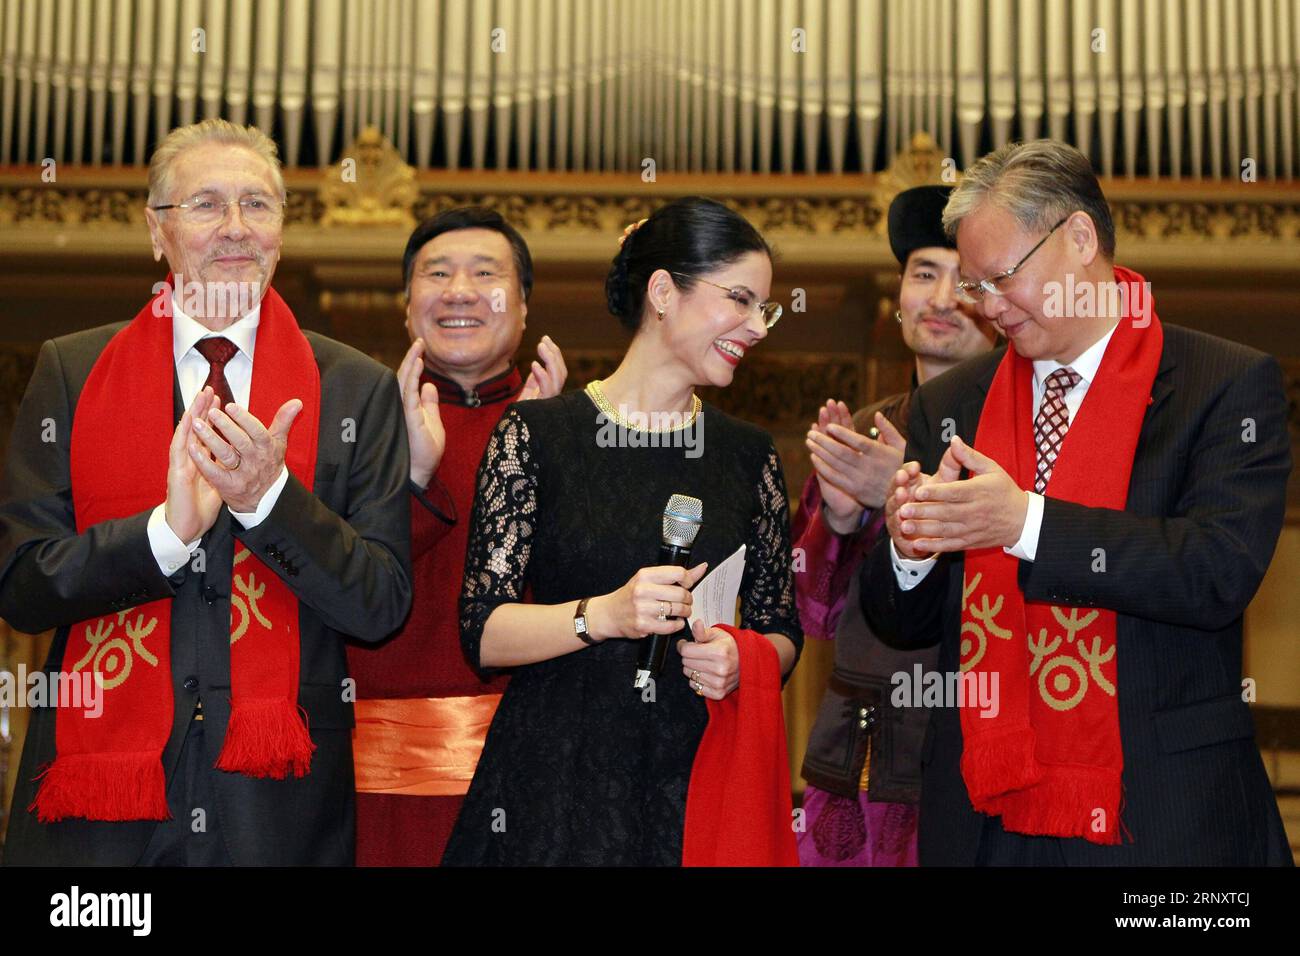 (180212) -- BUCHAREST, Feb. 12, 2018 -- Romanian former President Emil Constantinescu (1st L), Romanian Vice Prime Minister Ana Birchall (C) and Chinese Ambassador to Romania Xu Feihong (1st R) attend an event celebrating the upcoming Chinese Lunar New Year at the Romanian Atheneum in Bucharest, capital of Romania, Feb. 10, 2018. ) (zy) ROMANIA-BUCHAREST-CHINESE LUNAR NEW YEAR CristianxCristel PUBLICATIONxNOTxINxCHN Stock Photo